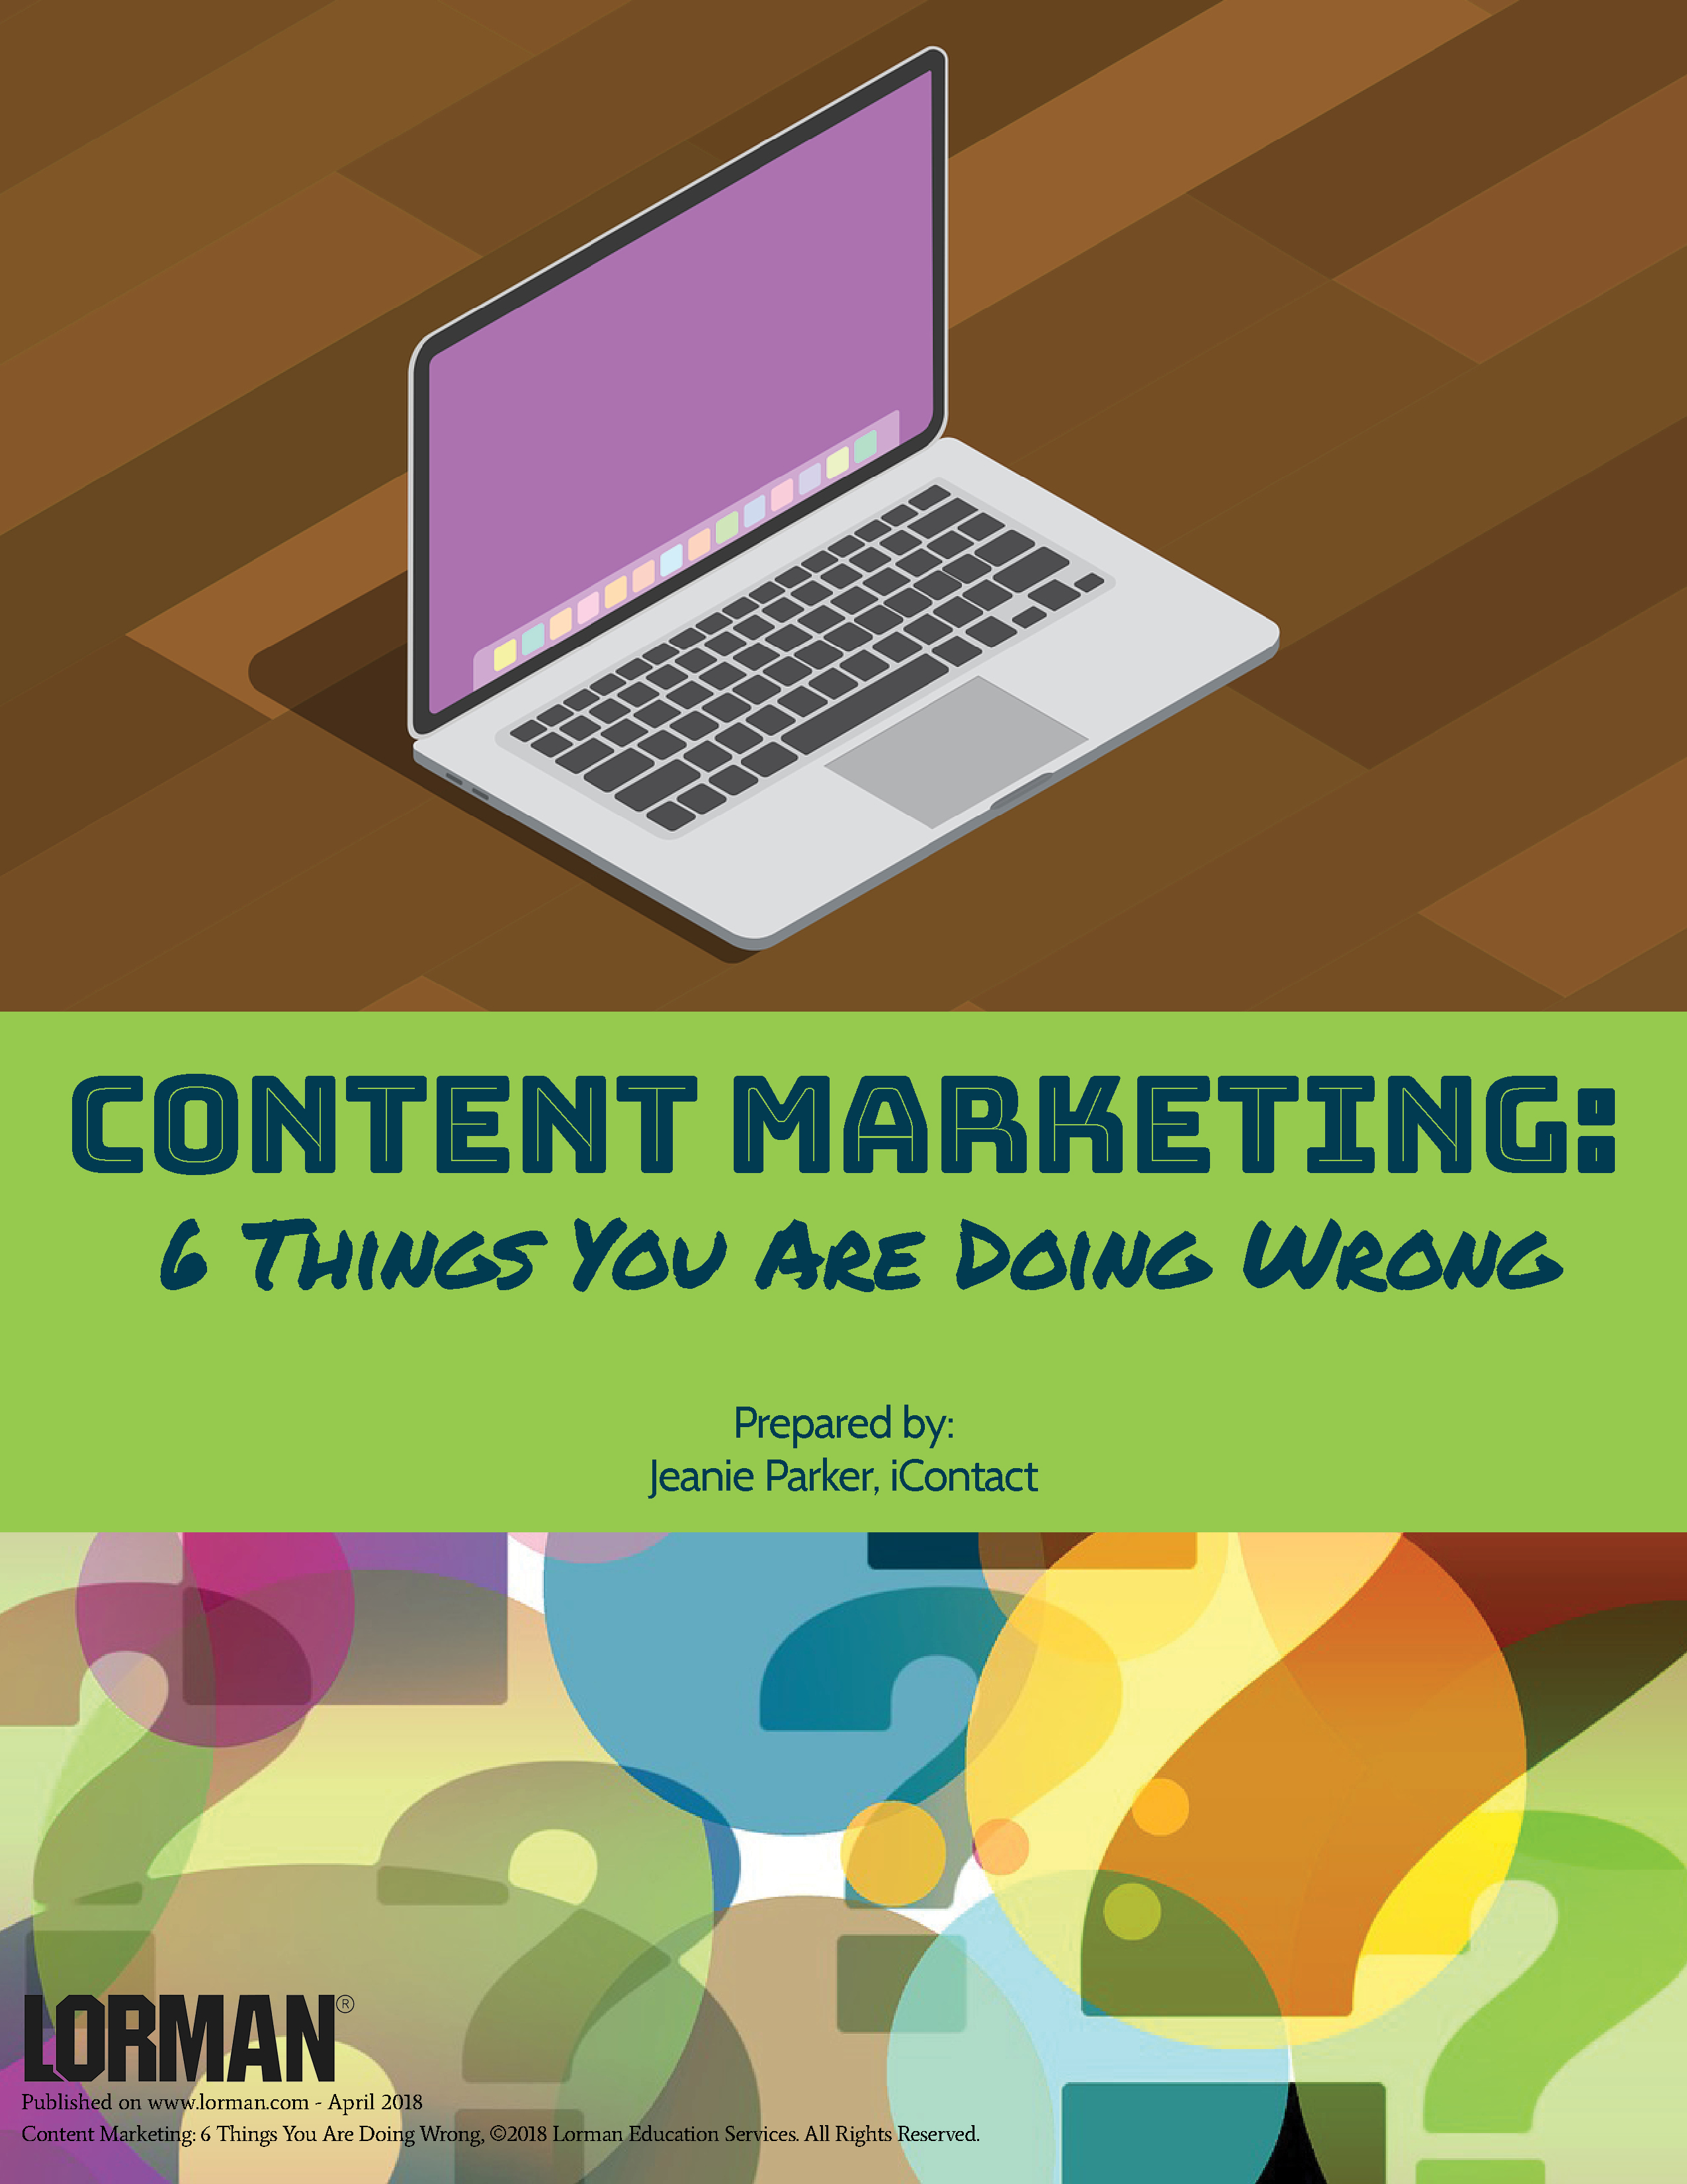 Content Marketing: 6 Things You Are Doing Wrong